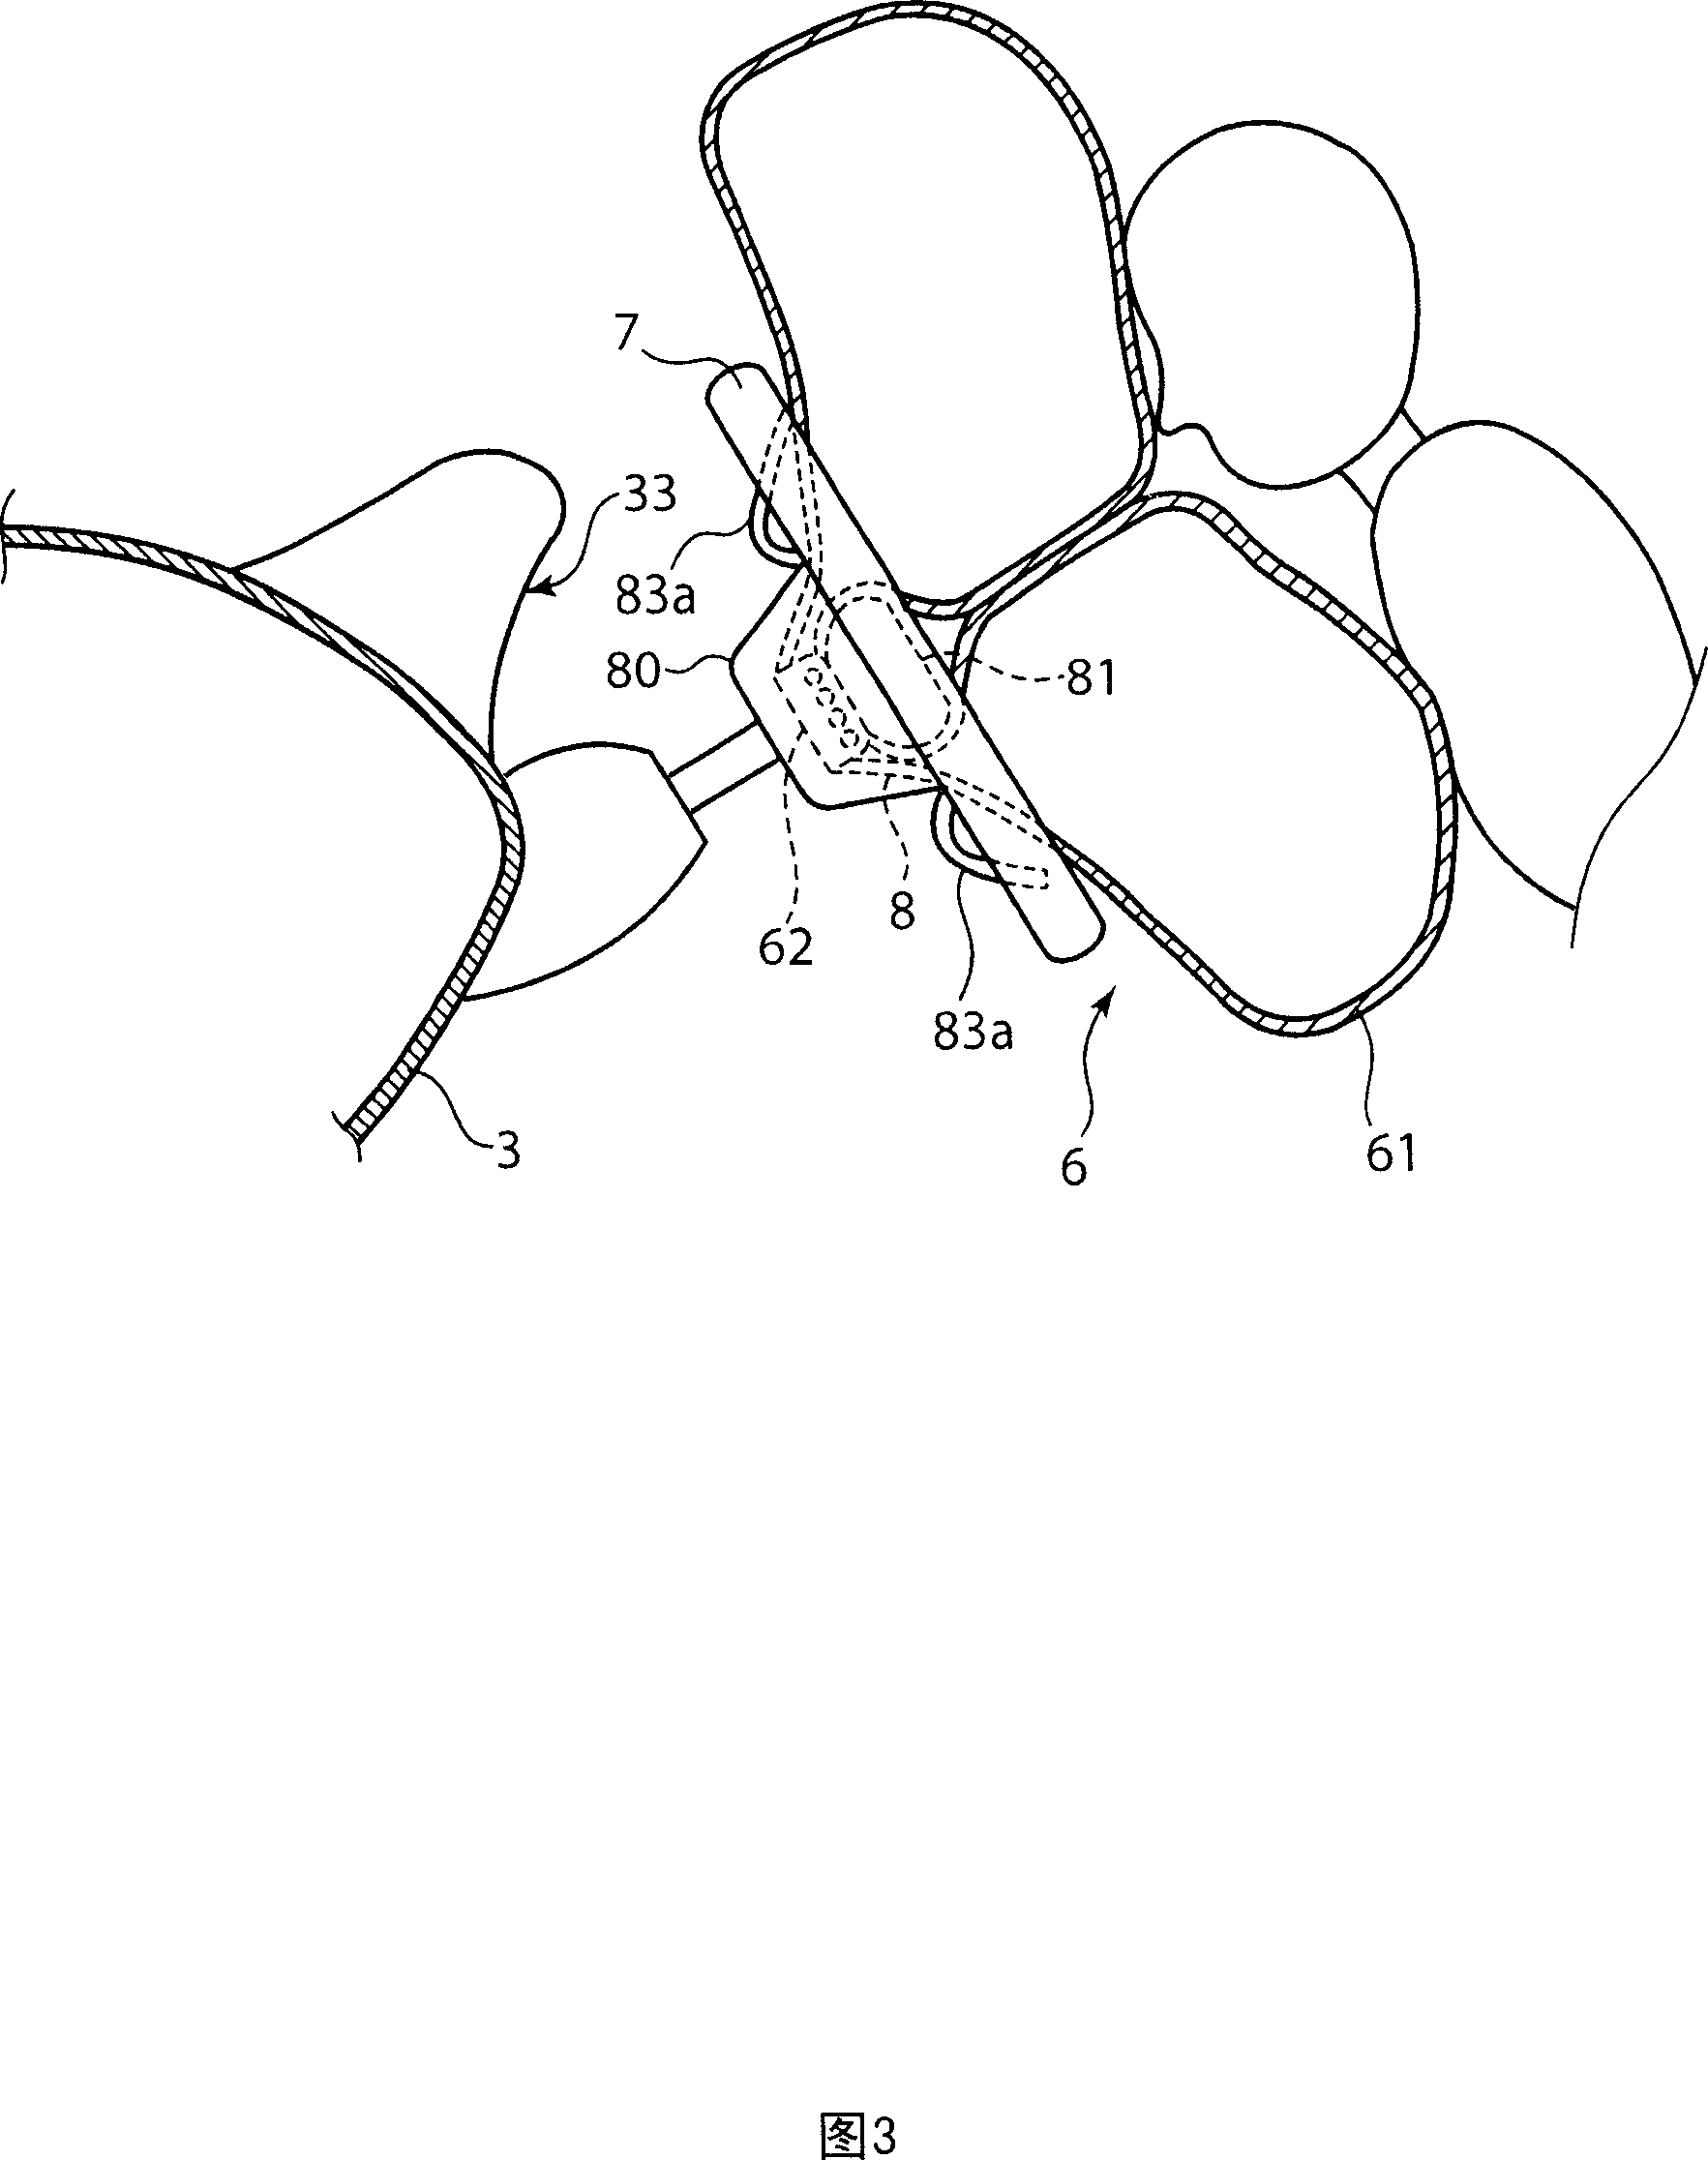 Steering wheel with airbag device